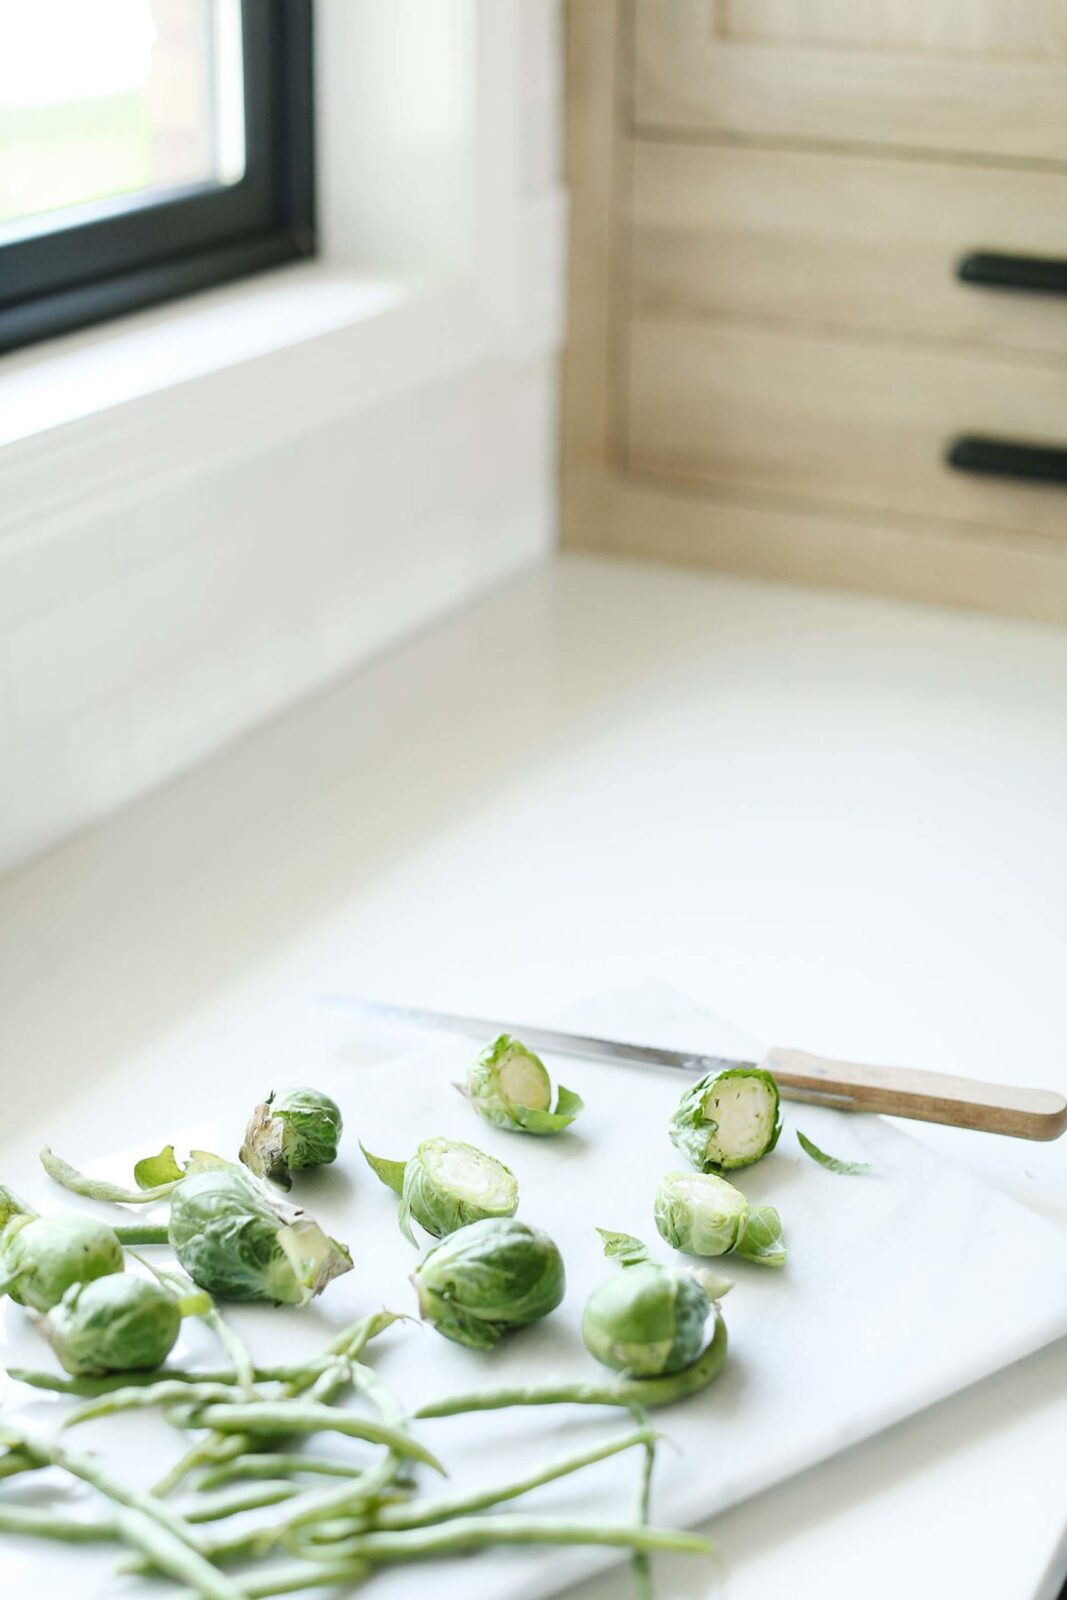 Tips for keeping your kitchen clean while preparing meals